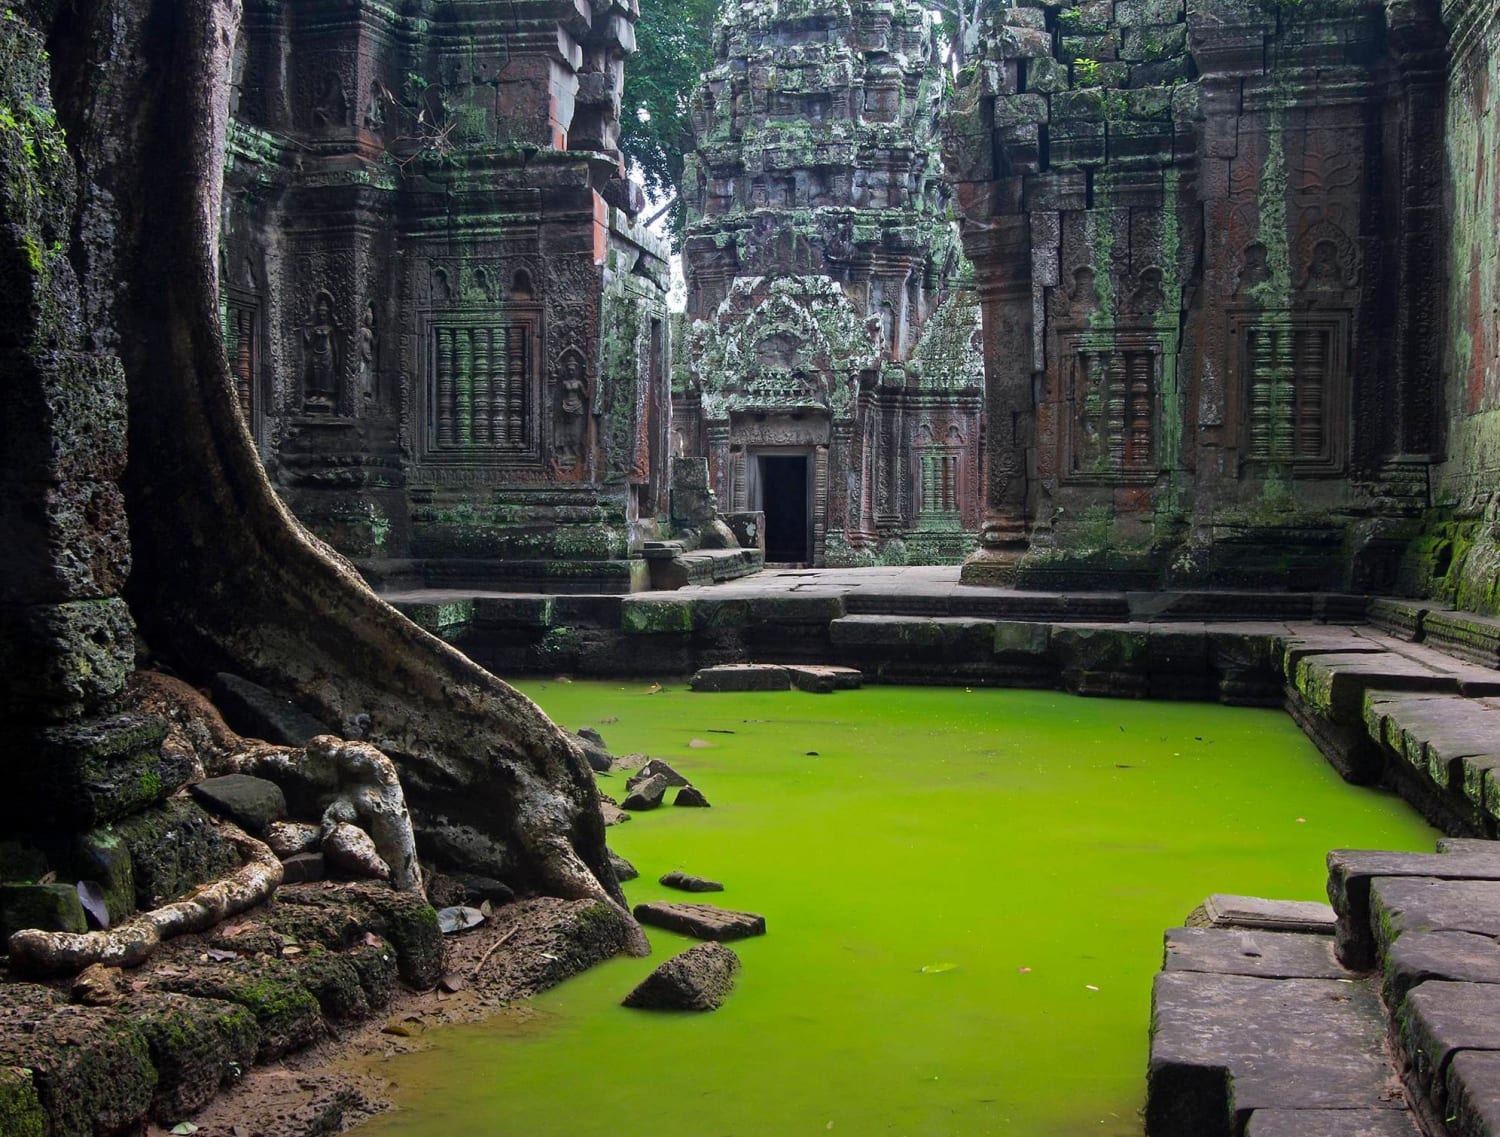 Ta Prohm temple in Siem Reap, Cambodia, built in the Bayon style largely in the late 12th and early 13th centuries CE. It was founded by the Khmer King Jayavarman VII as a Mahayana Buddhist monastery and university